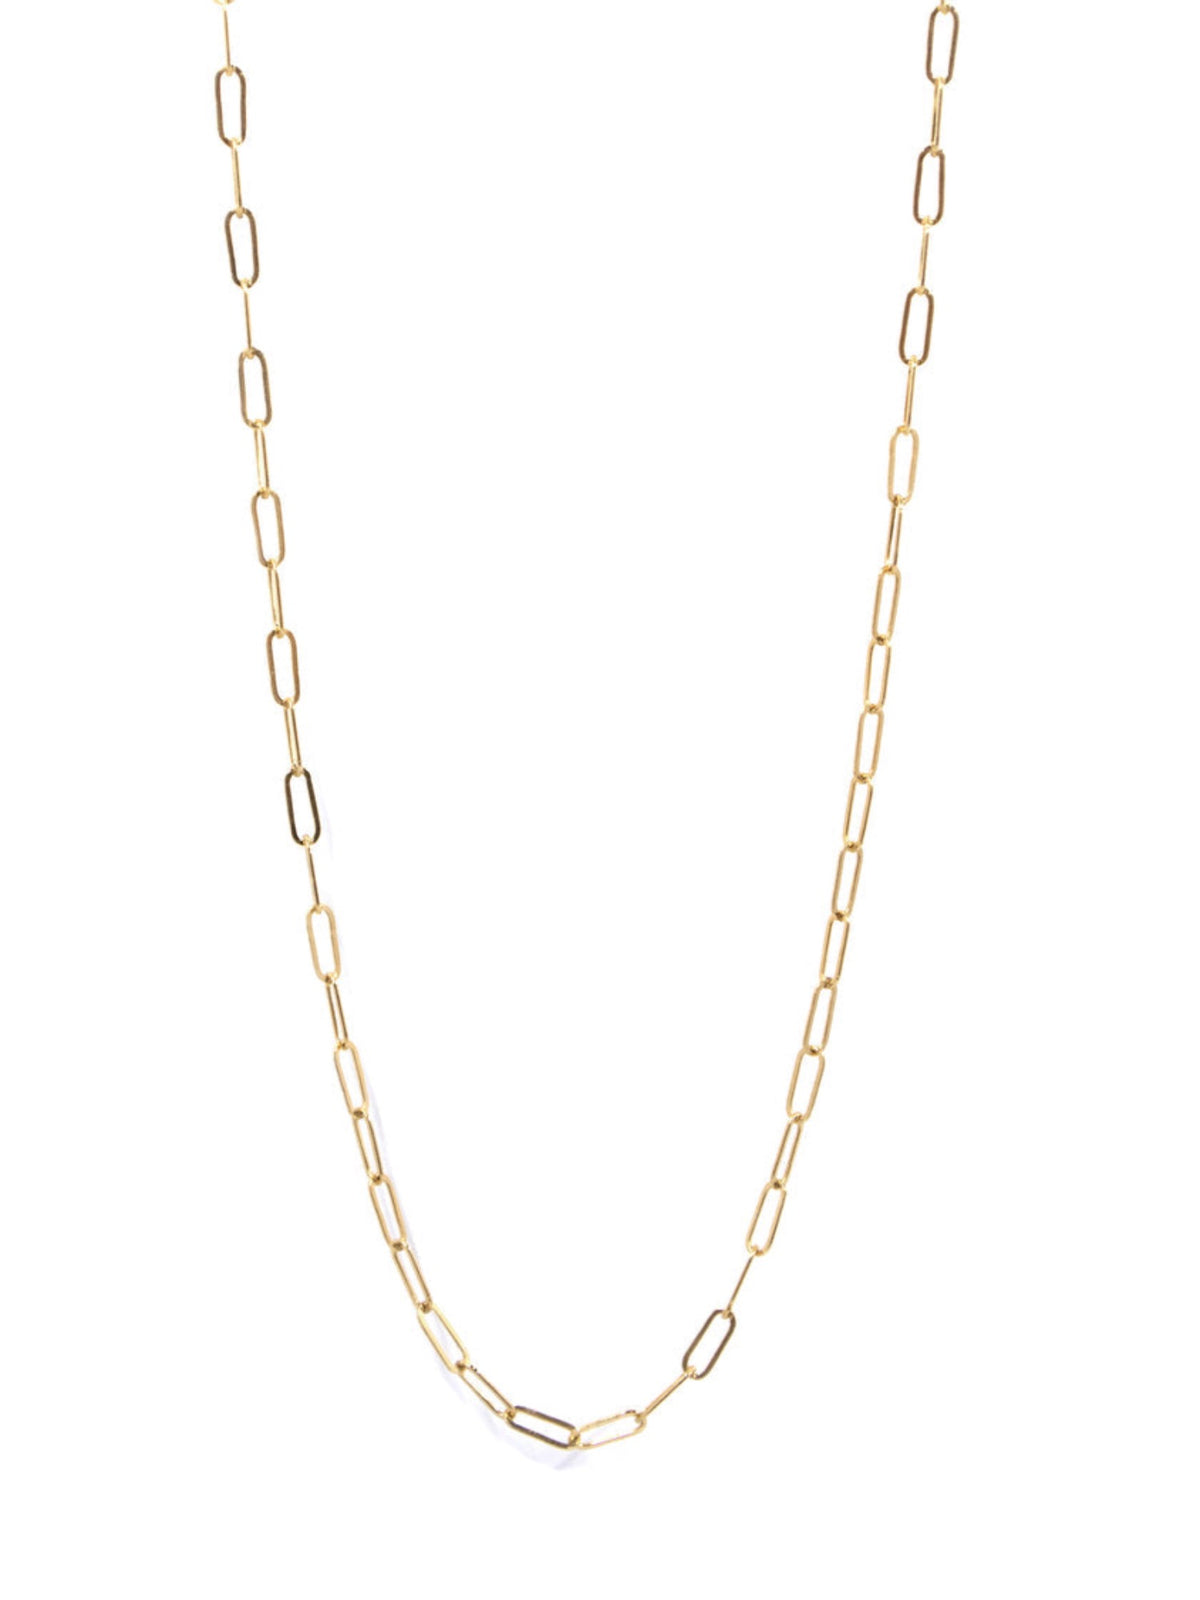 Bent by Courtney - Layering Chain Necklace - prodottihaccp